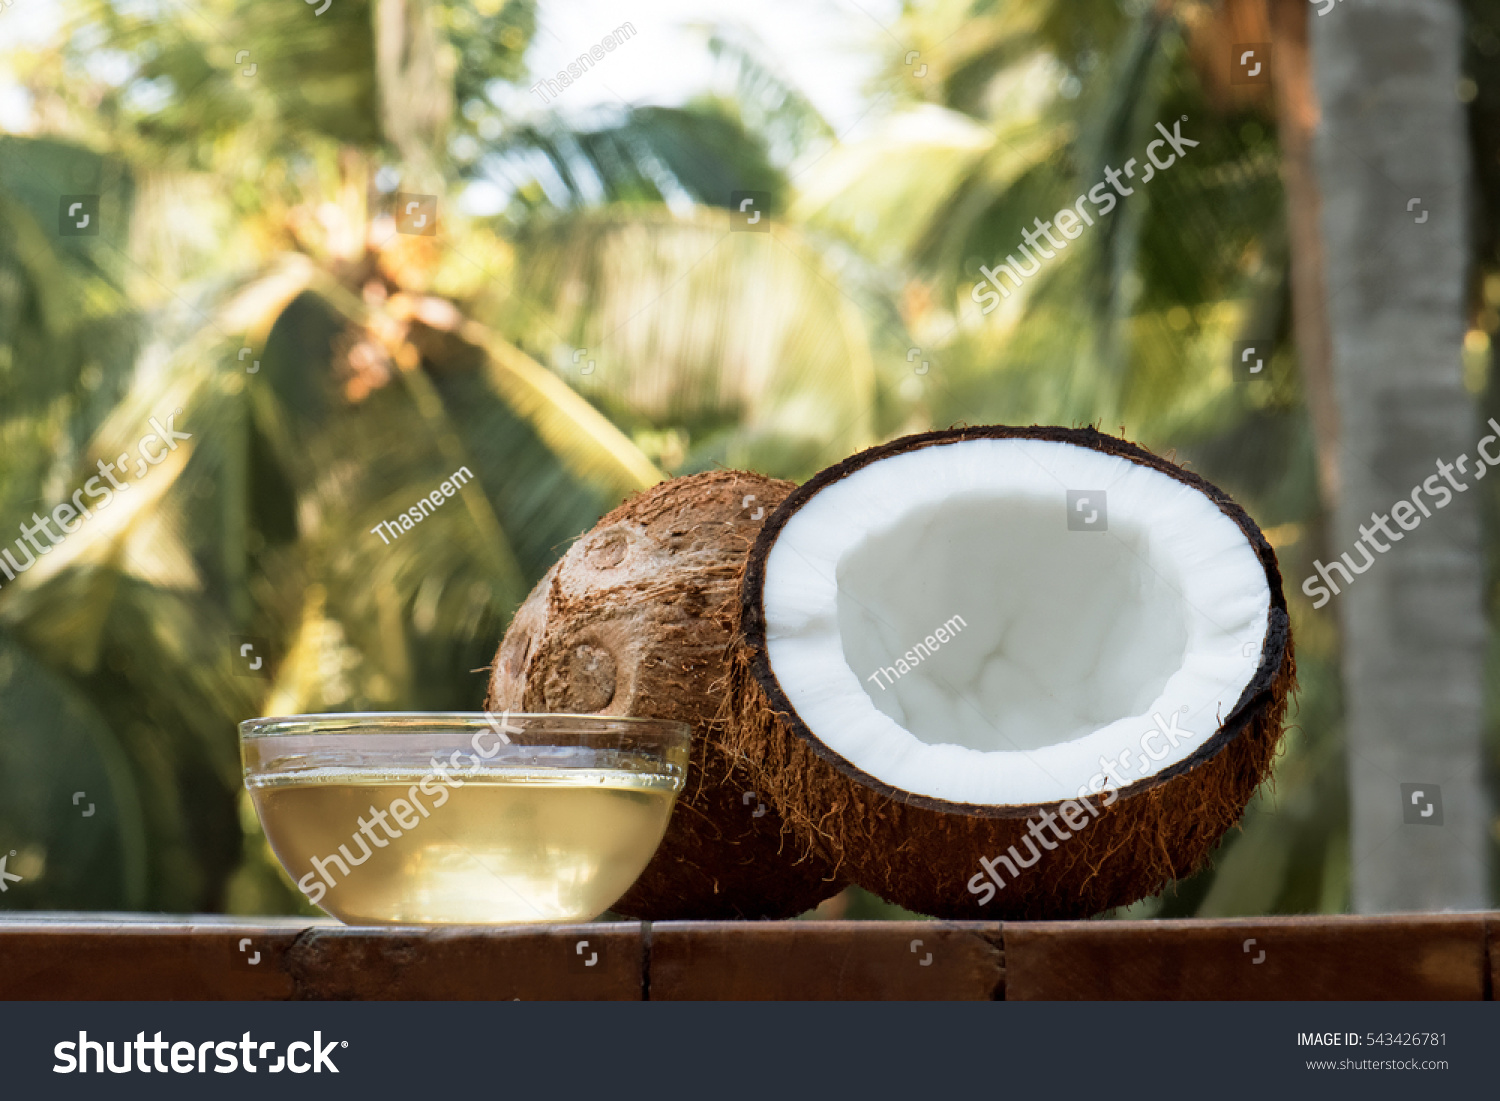 coconut and coconut oil with coconut tree background #543426781